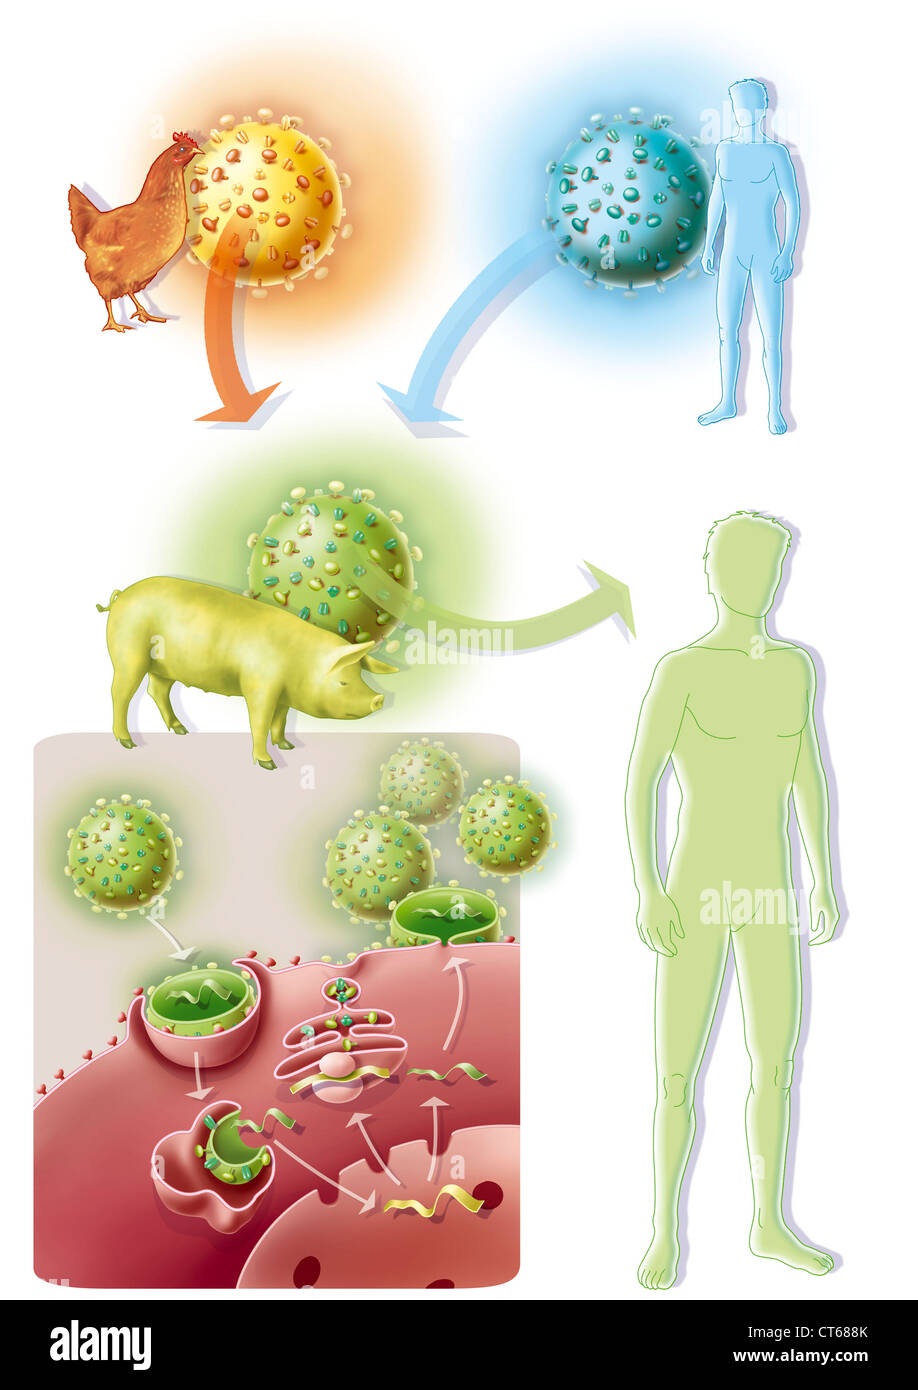 INFLUENZA A H1N1 INFECTION Stock Photo